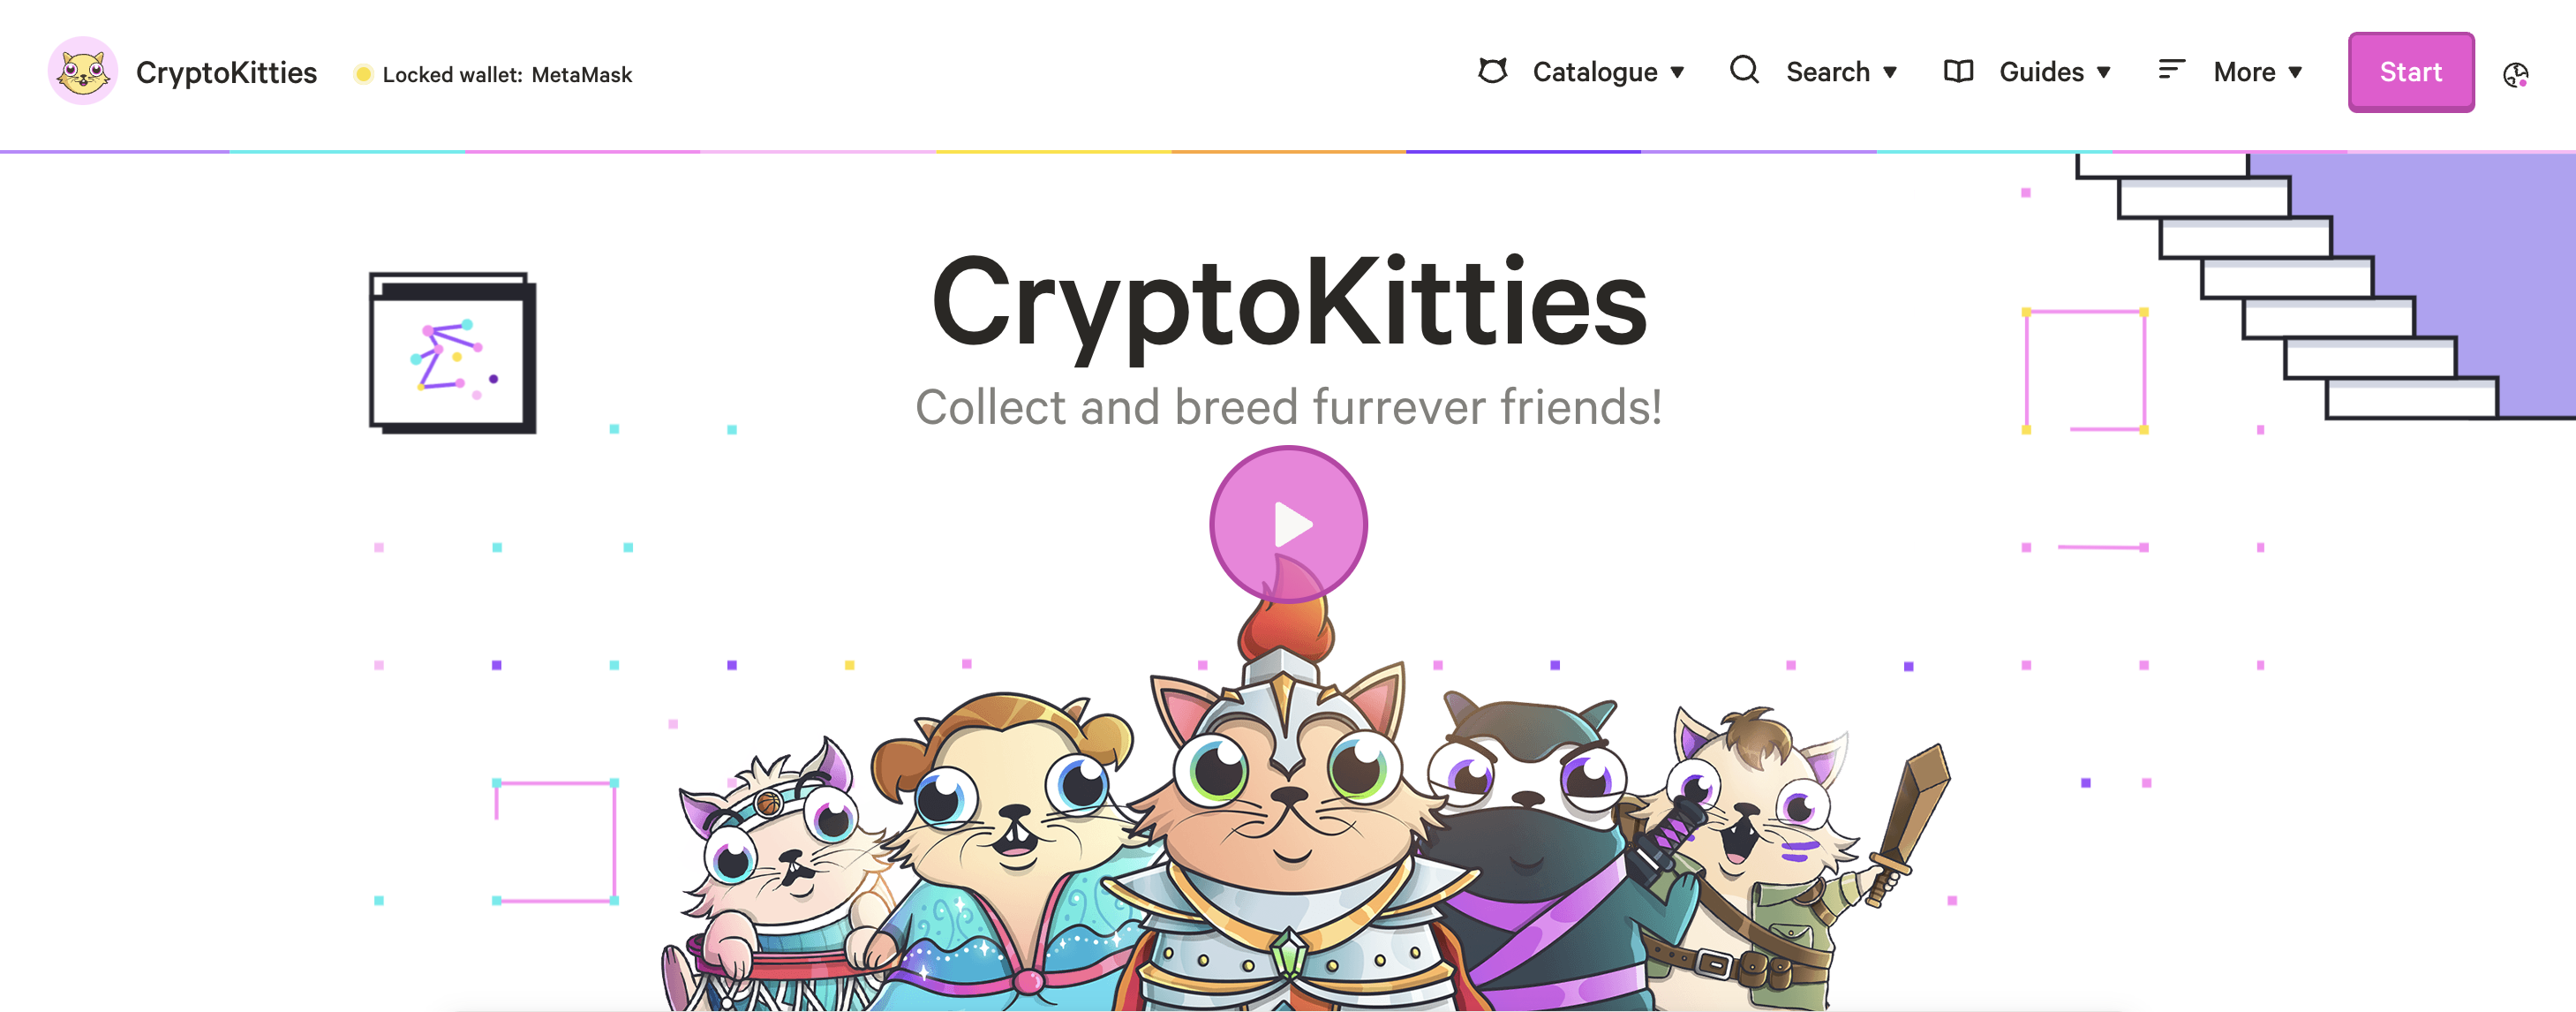 CryptoKitties - one of the most popular games in Web3